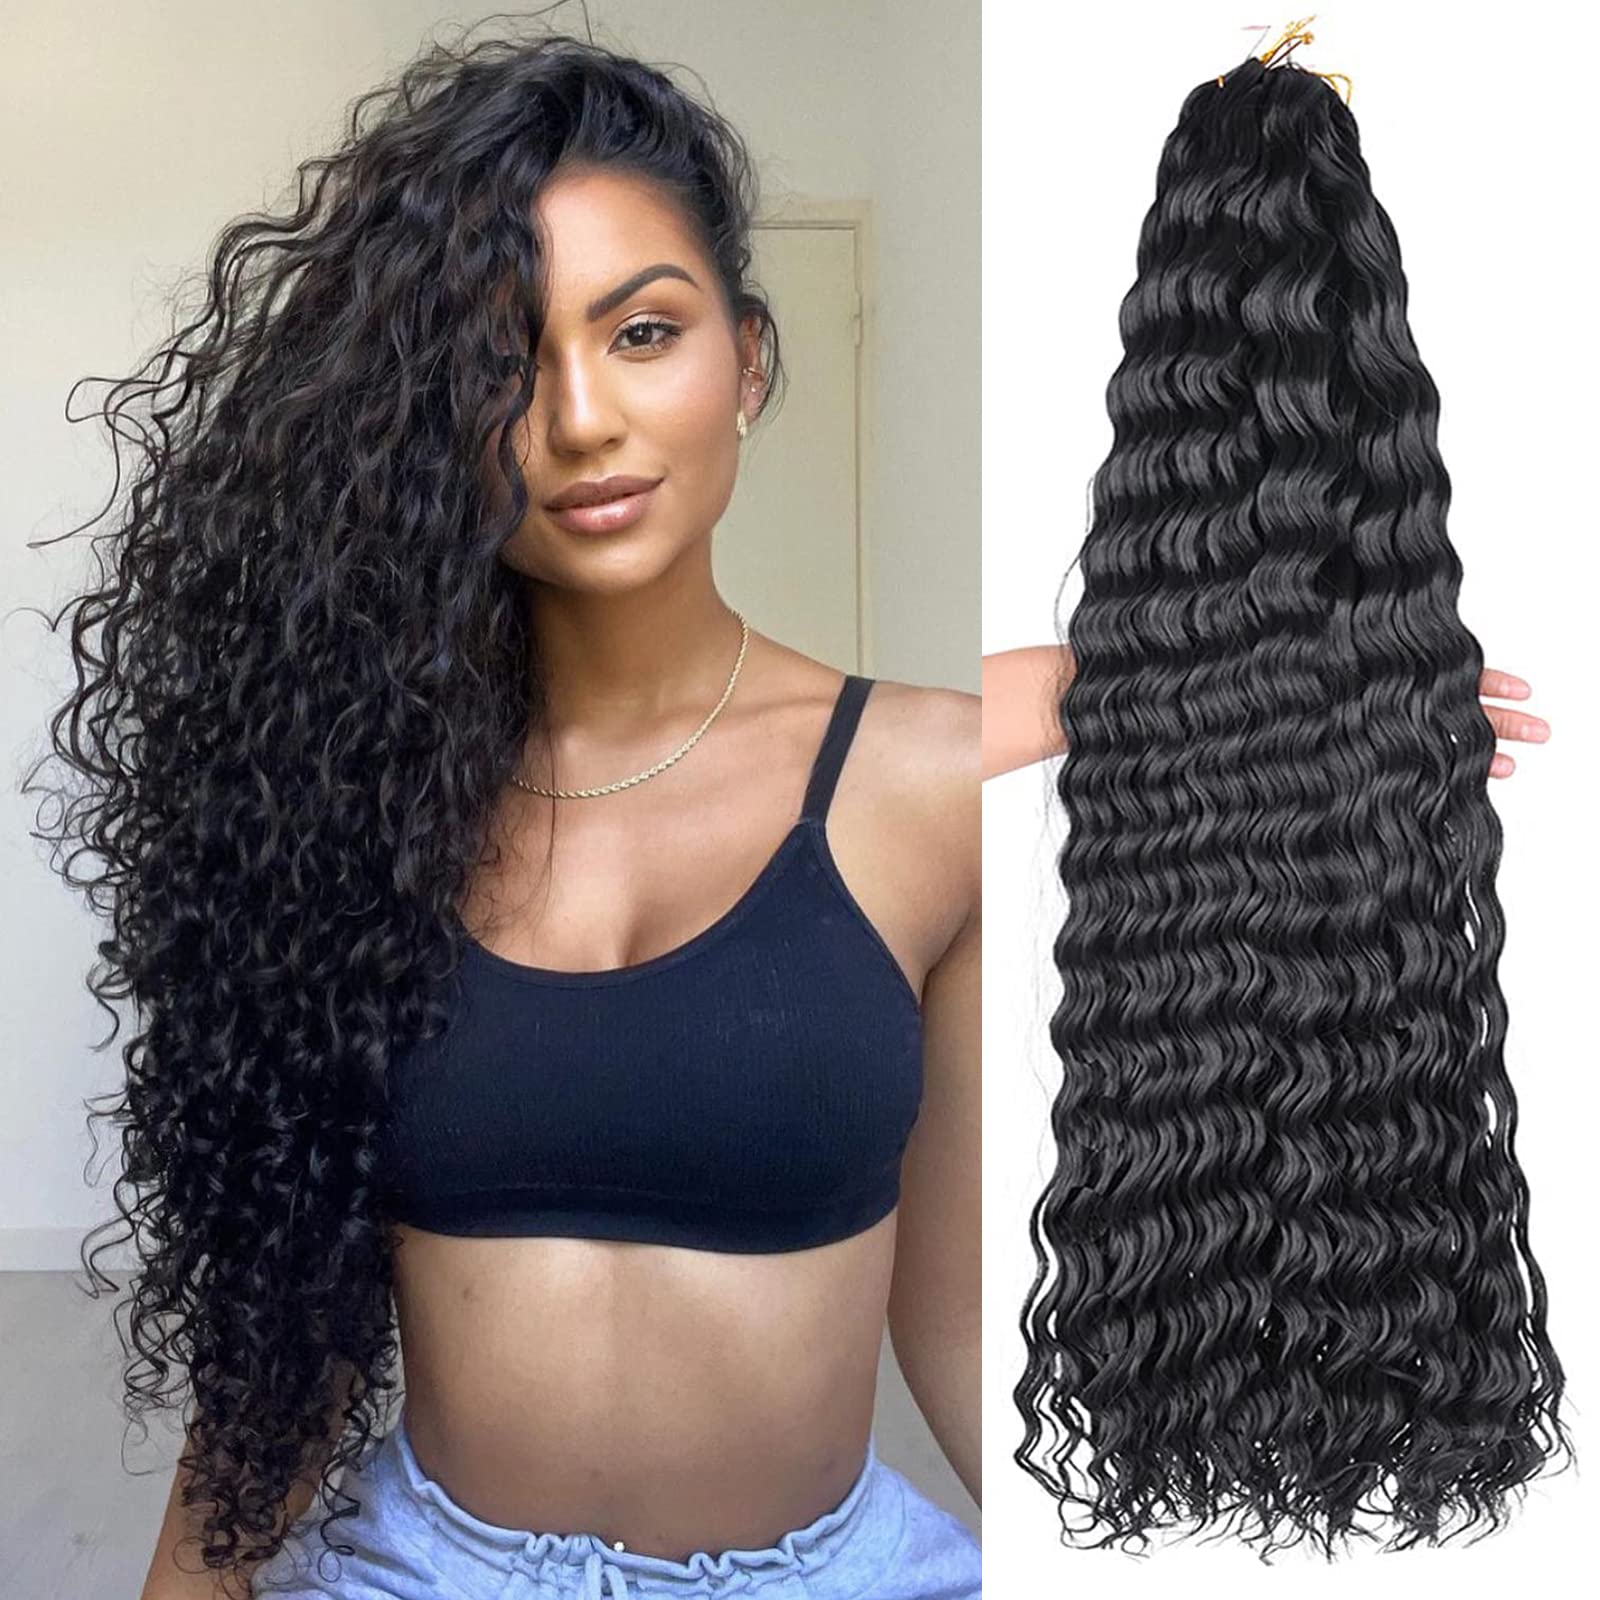 Silike Synthetic 32 inch Crochet Hair Curly Deep Wave Braiding Hair Long  Loose Ocean Wave Crochet Hair for Women Soft Like Human Hair Extensions 4  Packs (32inch 1B) 32 Inch (Pack of 4) 1B